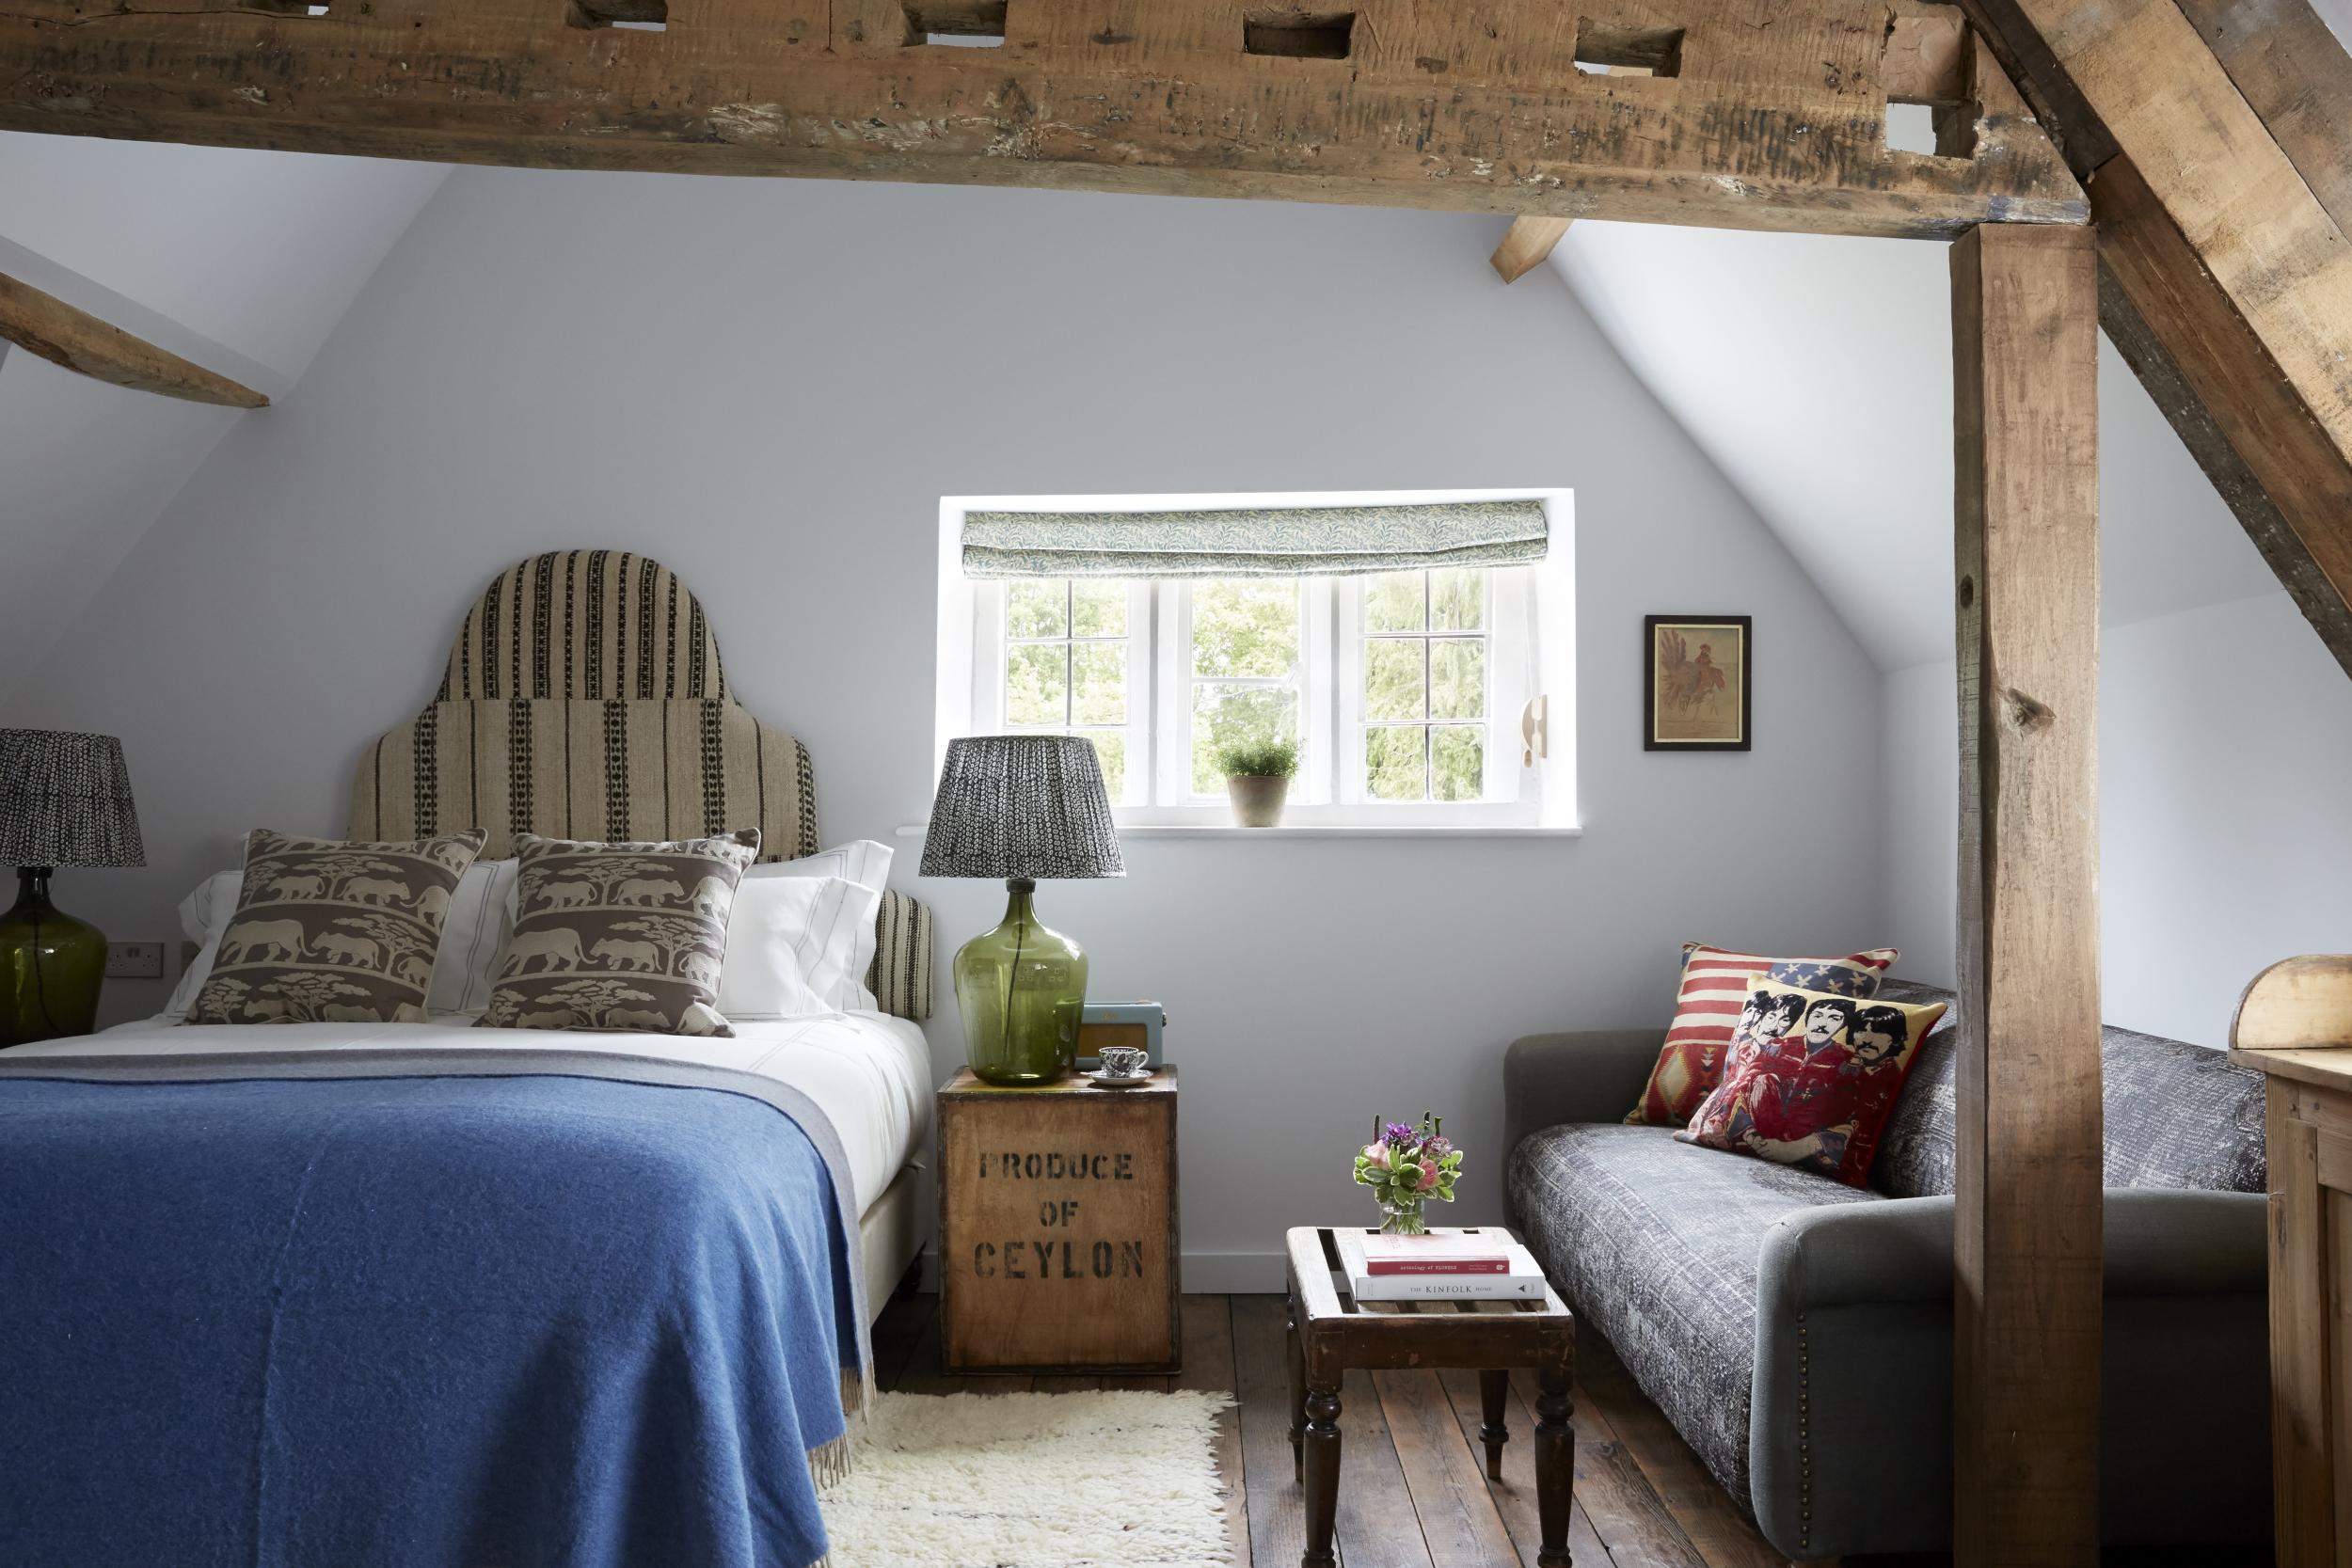 The new hotel takes Oxfordshire heritage and adds a bit of boho flair